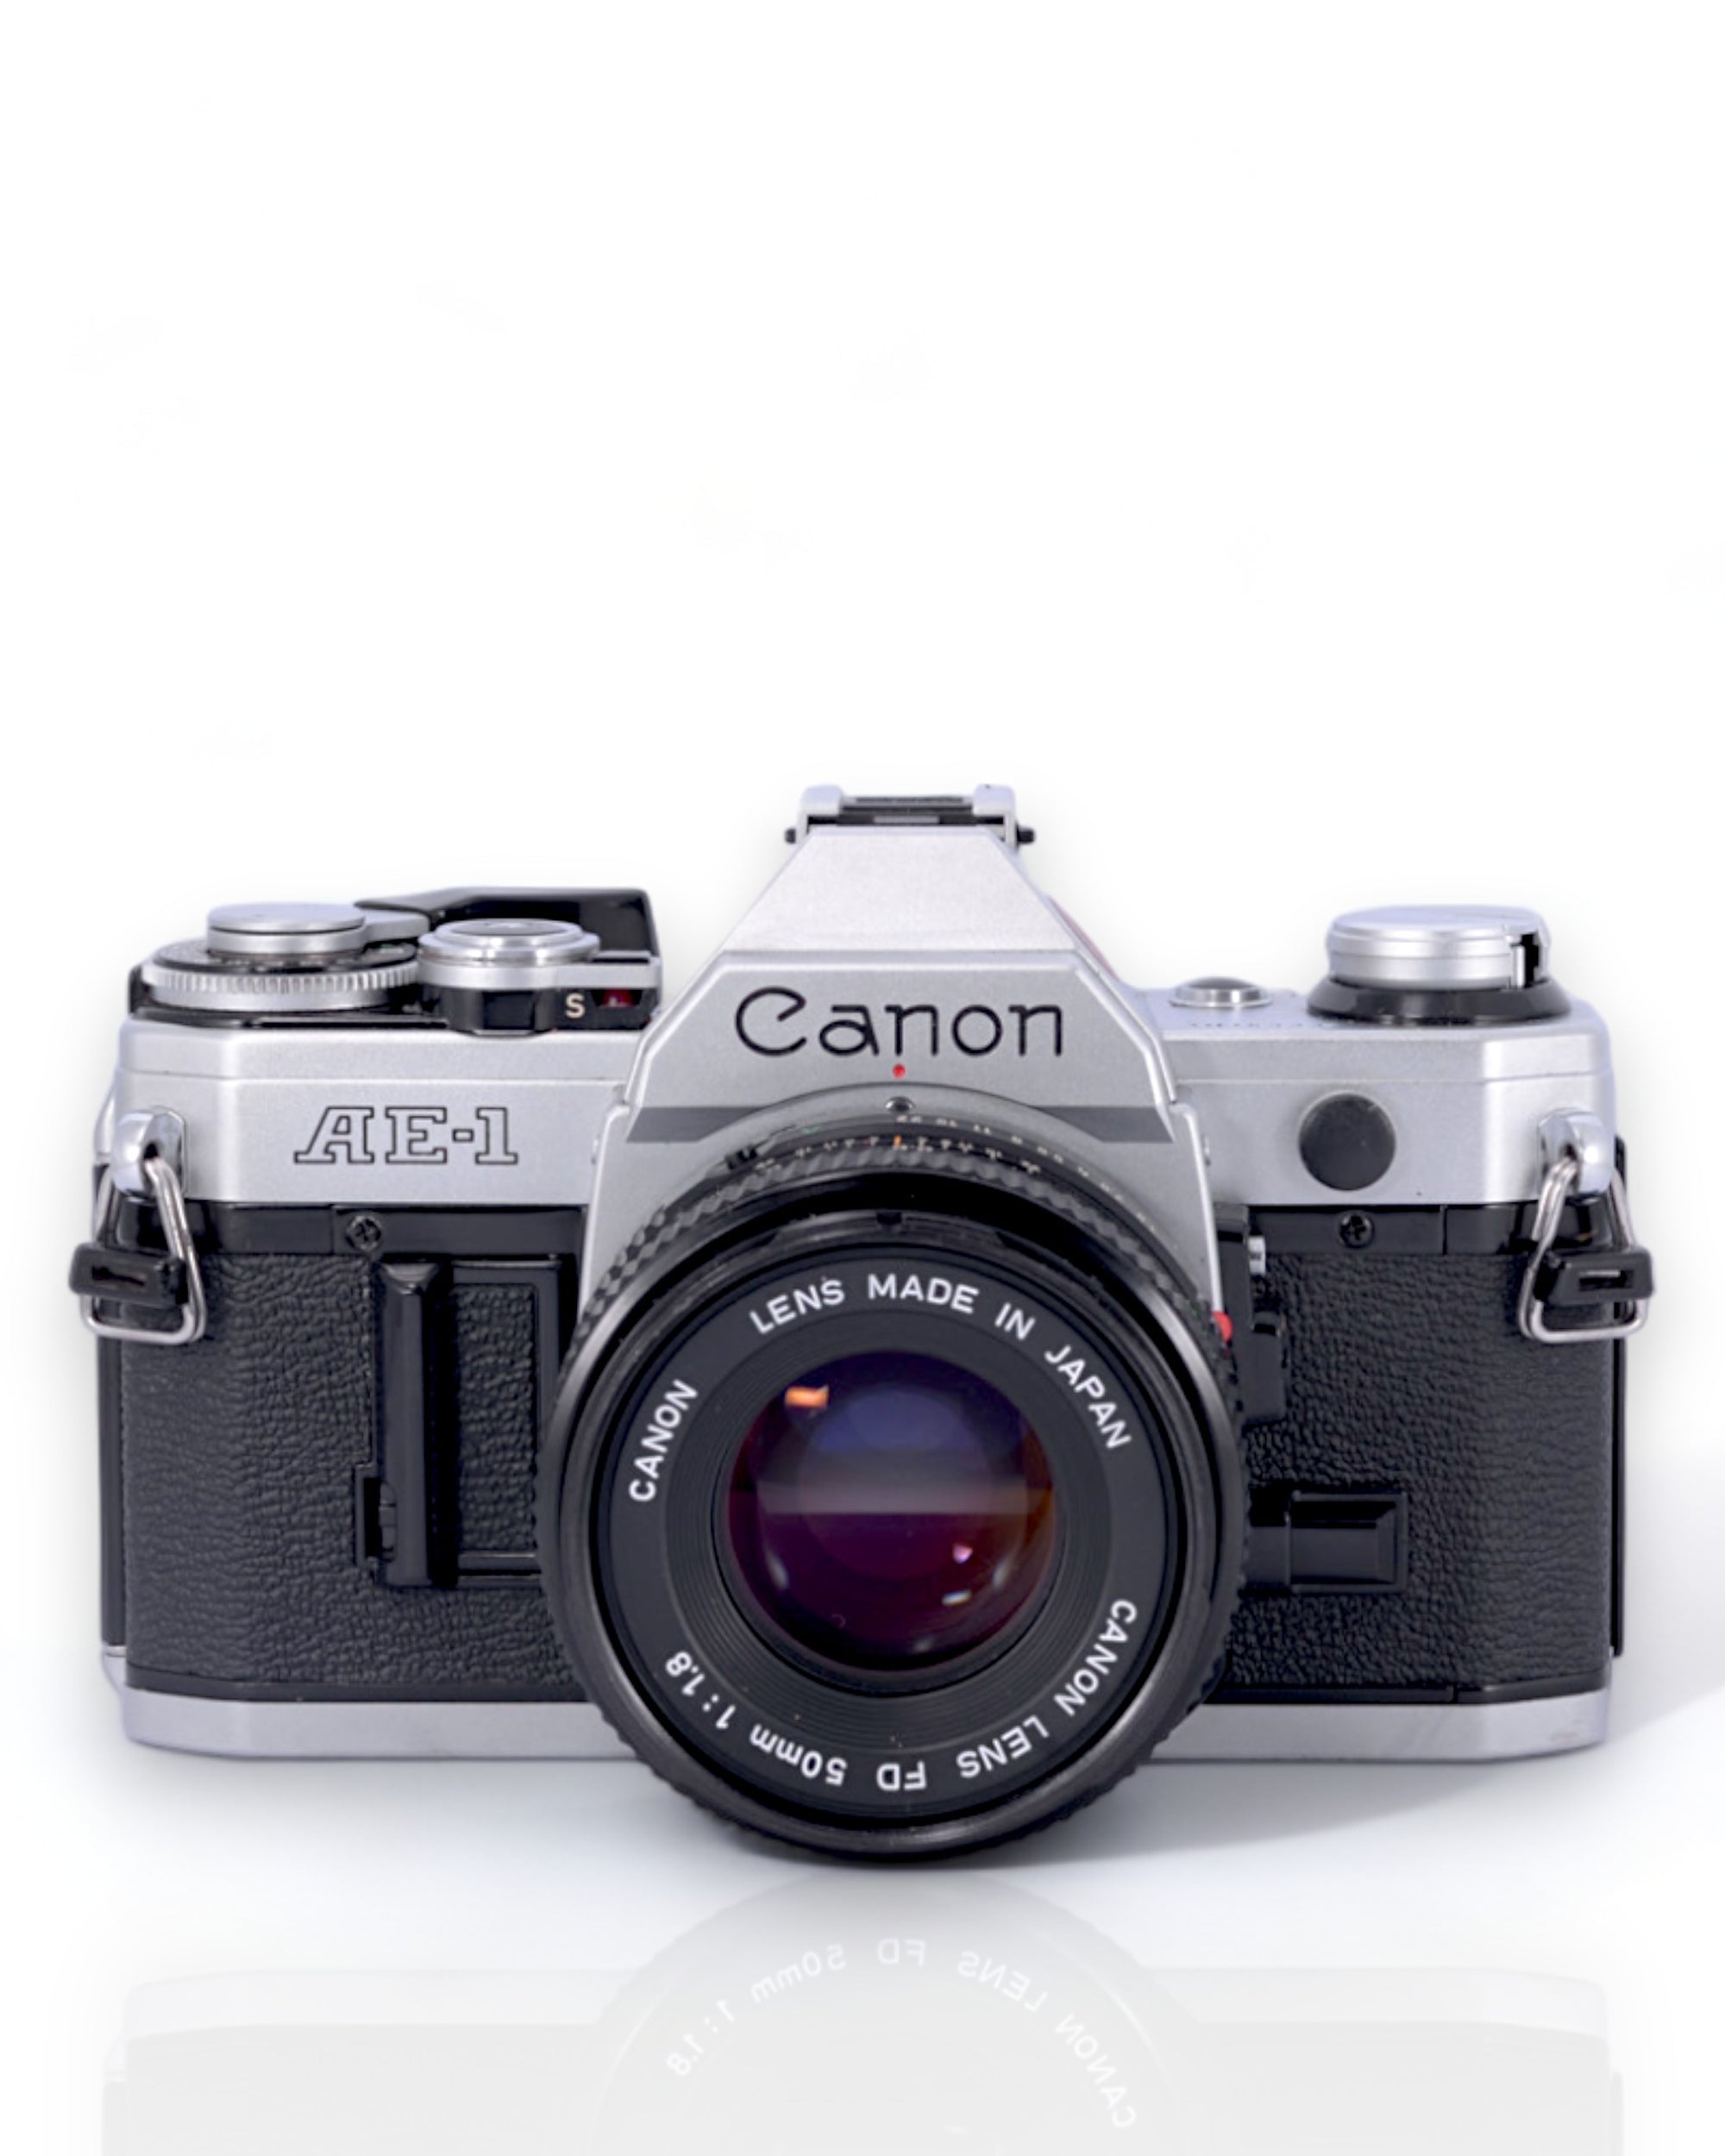 Canon AE-1 35mm SLR film camera with 50mm f1.8 lens